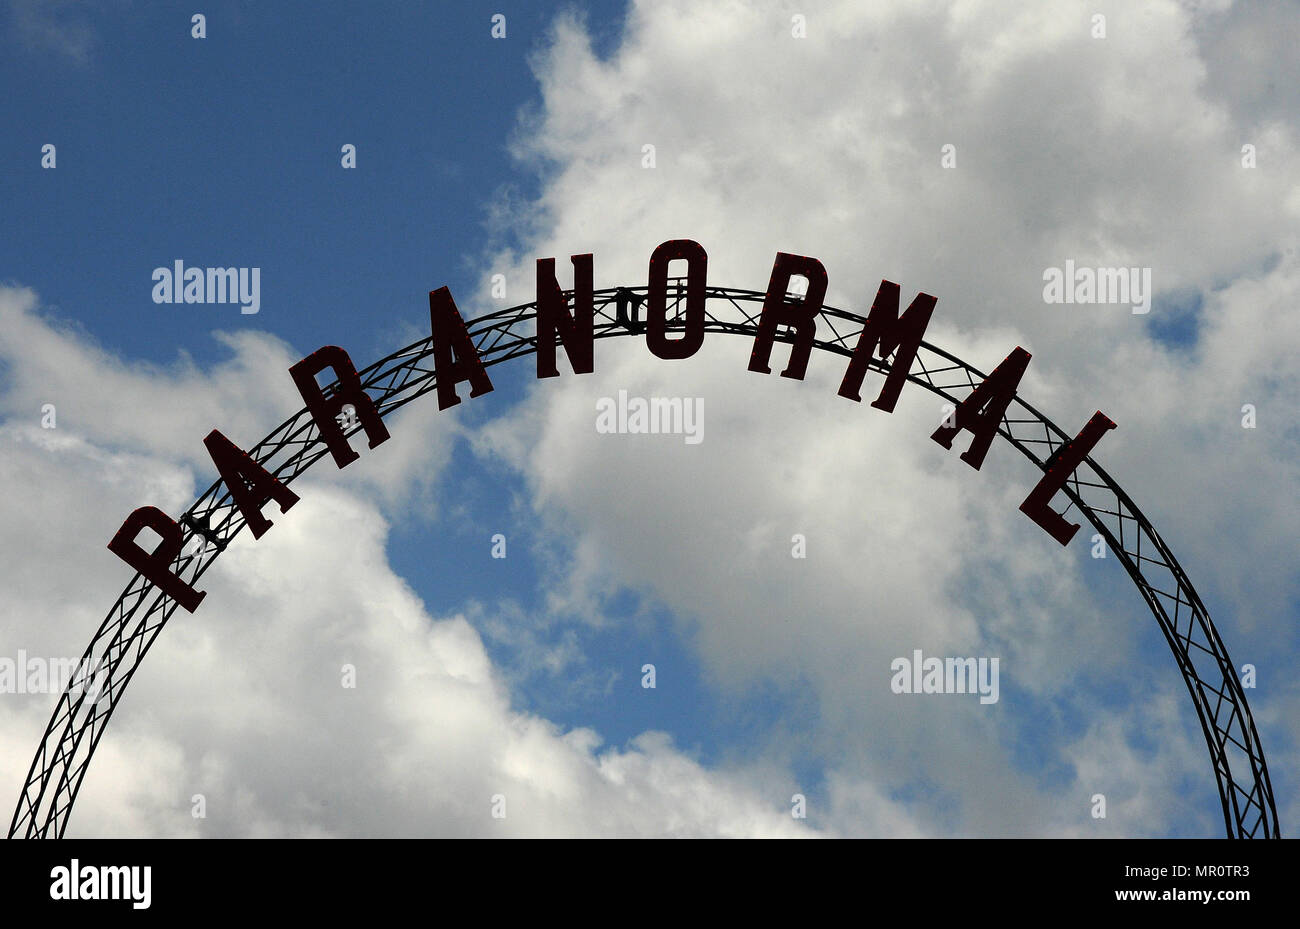 Palmetto, Florida, USA. 23rd May, 2018. A sign at the top of the Paranormal Cirque circus tent is seen during a media preview on May 23, 2018 in Palmetto, Florida. The new Paranormal Cirque, created by Manuel Rebecca, the president and owner of Cirque Italia, is in rehearsals for its first ever performance in Palmetto, Florida on June 7, 2018. The circus combines horror, stunts, illusions, theater, and cabaret, and is designed for an adult audience. (Paul Hennessy/Alamy) Credit: Paul Hennessy/Alamy Live News Stock Photo